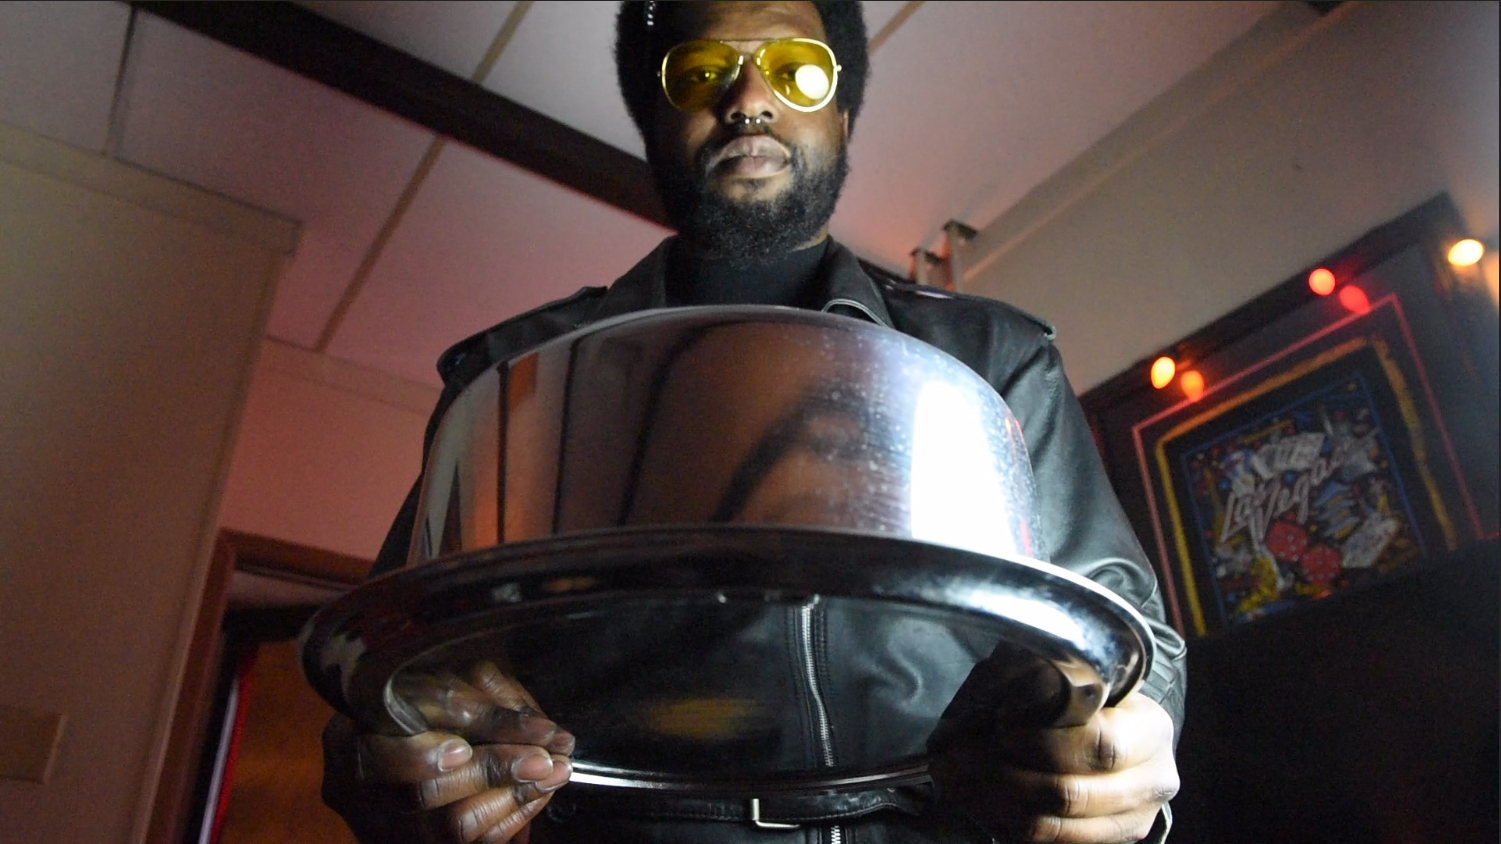 Image: Film still from "Thirst Trap" featuring actor Blackson leaning forward in preparation to serve his queen cake from a stainless steel cake carrier. Photo courtesy of Heather Raquel Phillips.